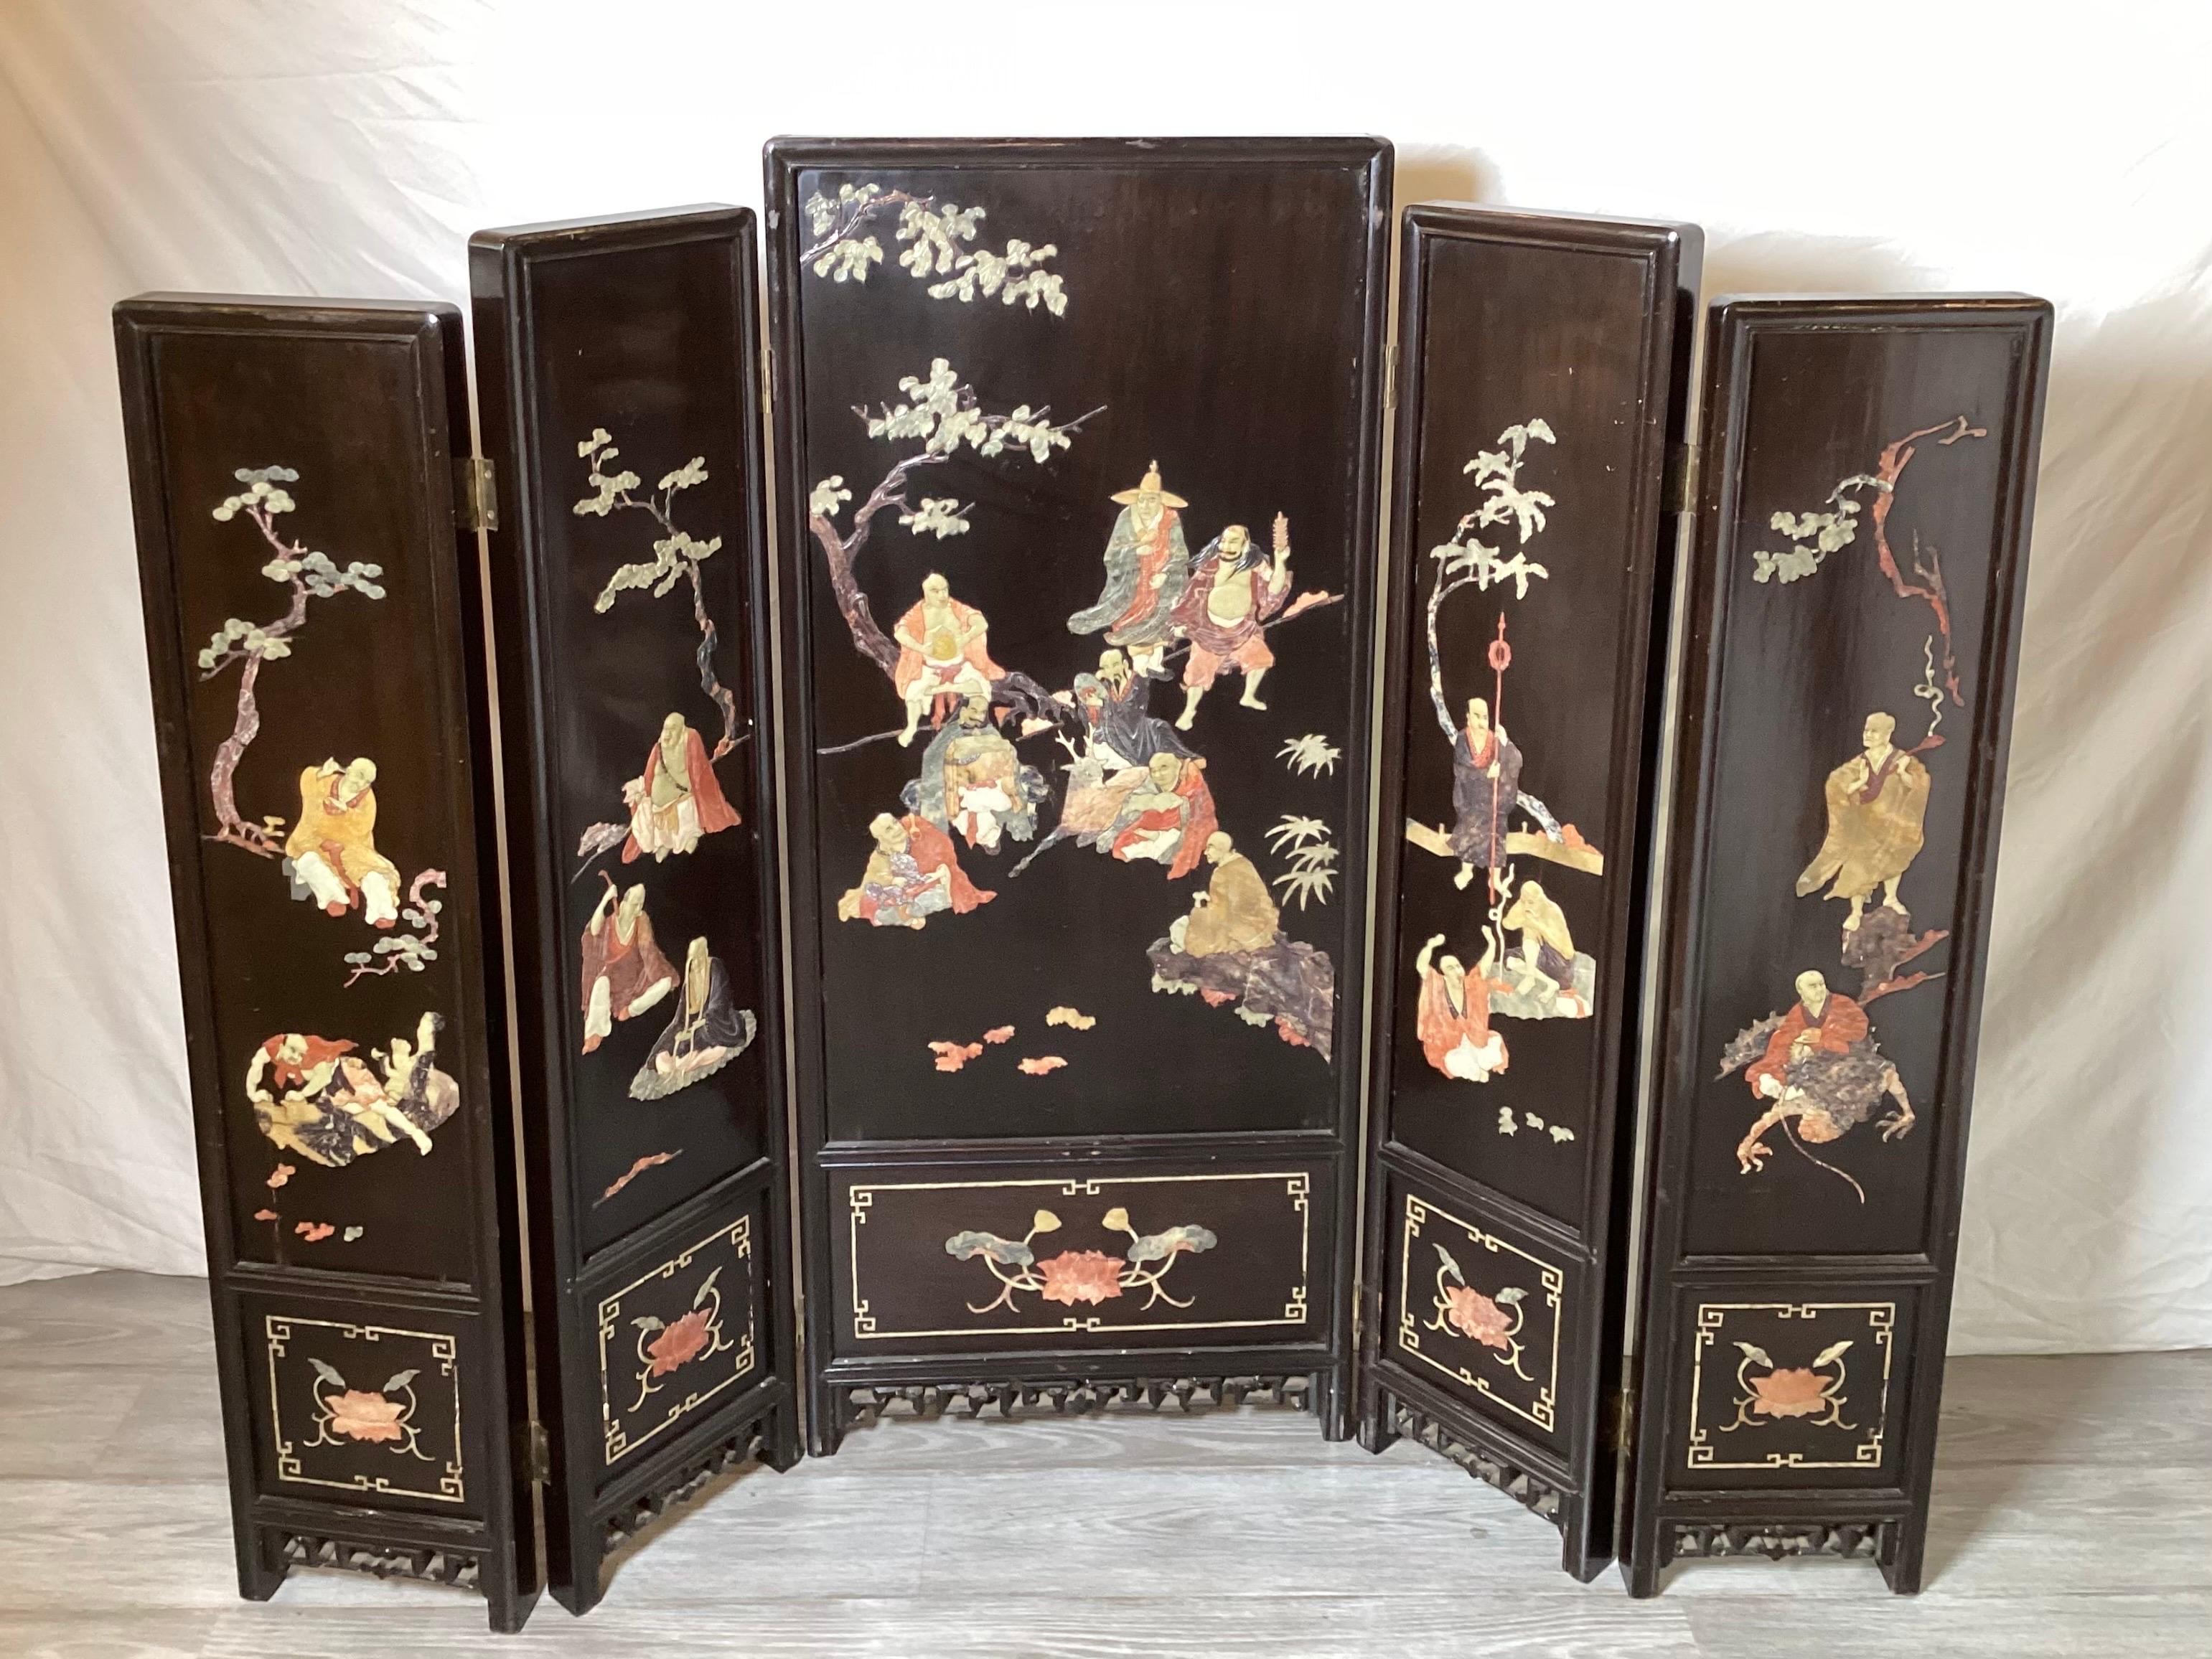 A late 19th century five panel screen with black lacquer finish. Each panel with carved soapstone figures of immortals. The center panel is 19.5 inches wide, the side four panels are 9.5 each, total expansion is.